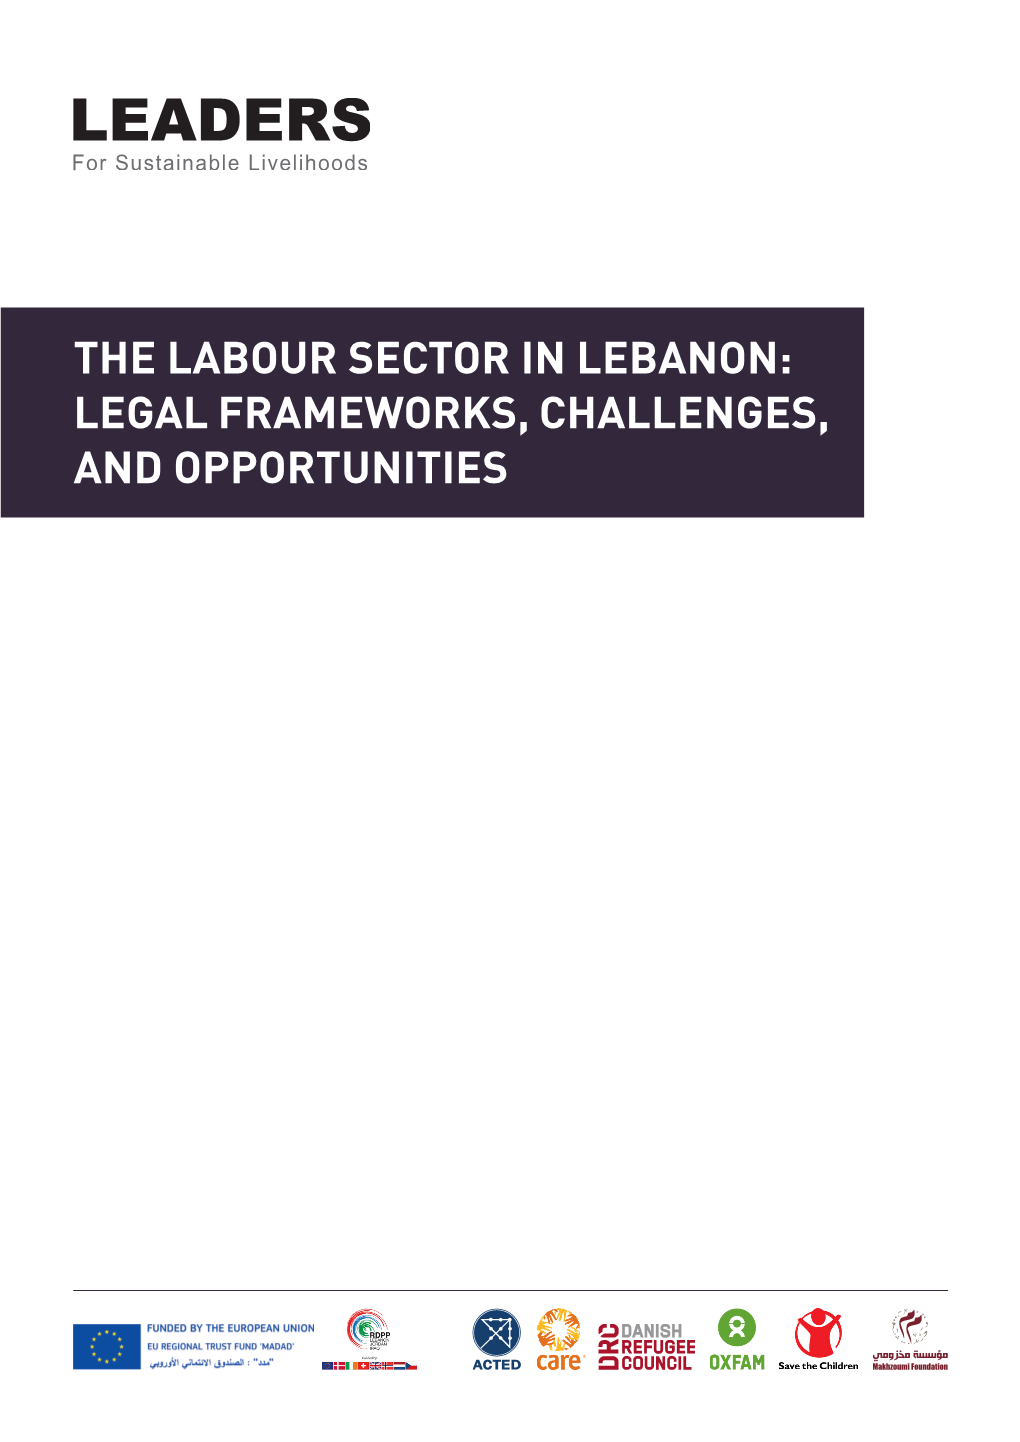 The Labour Sector in Lebanon: Legal Frameworks